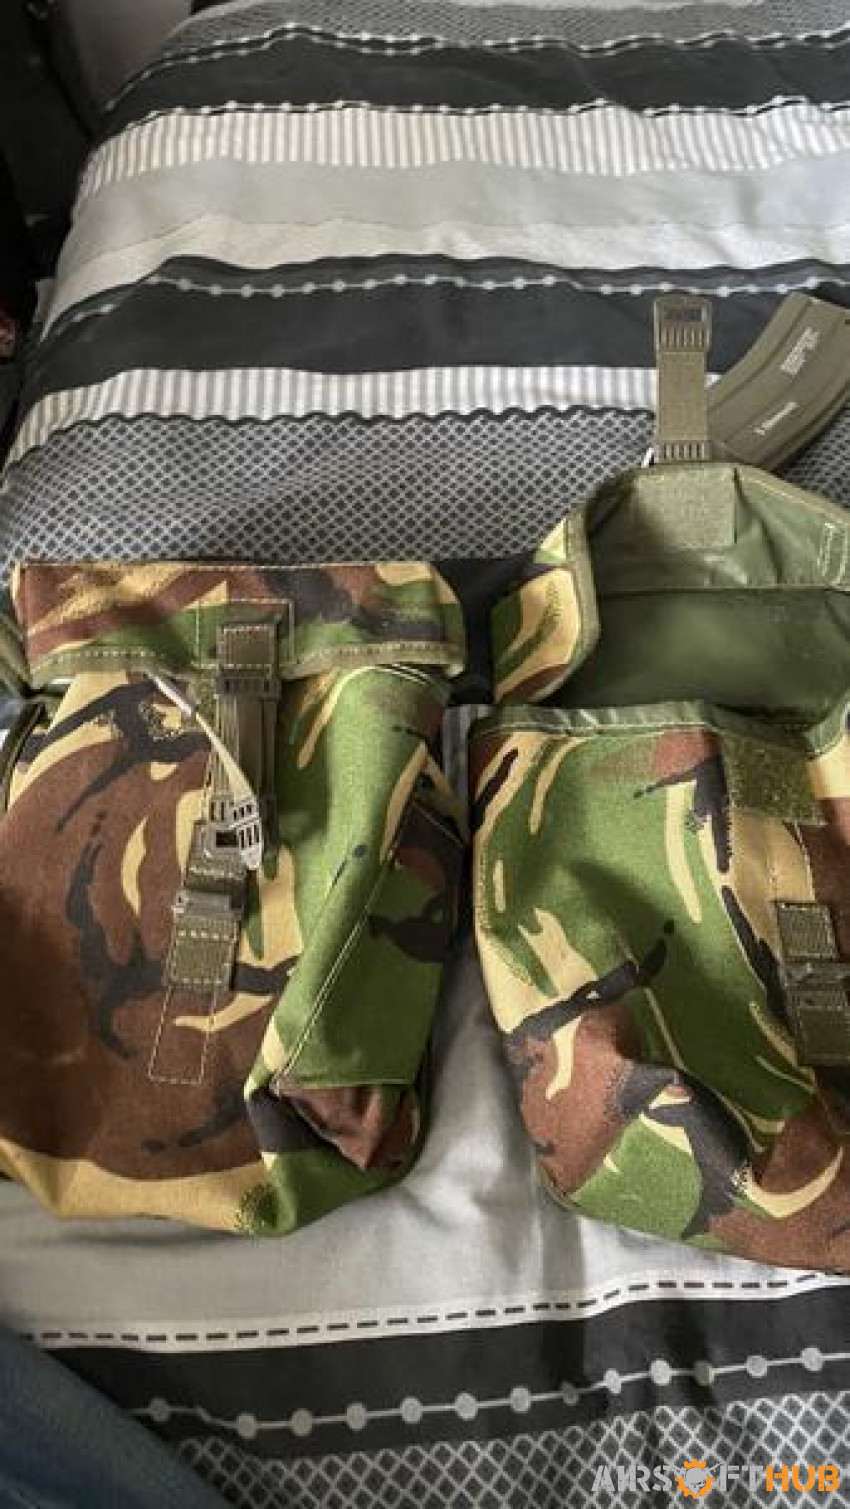 DPM LMG pouch - Used airsoft equipment